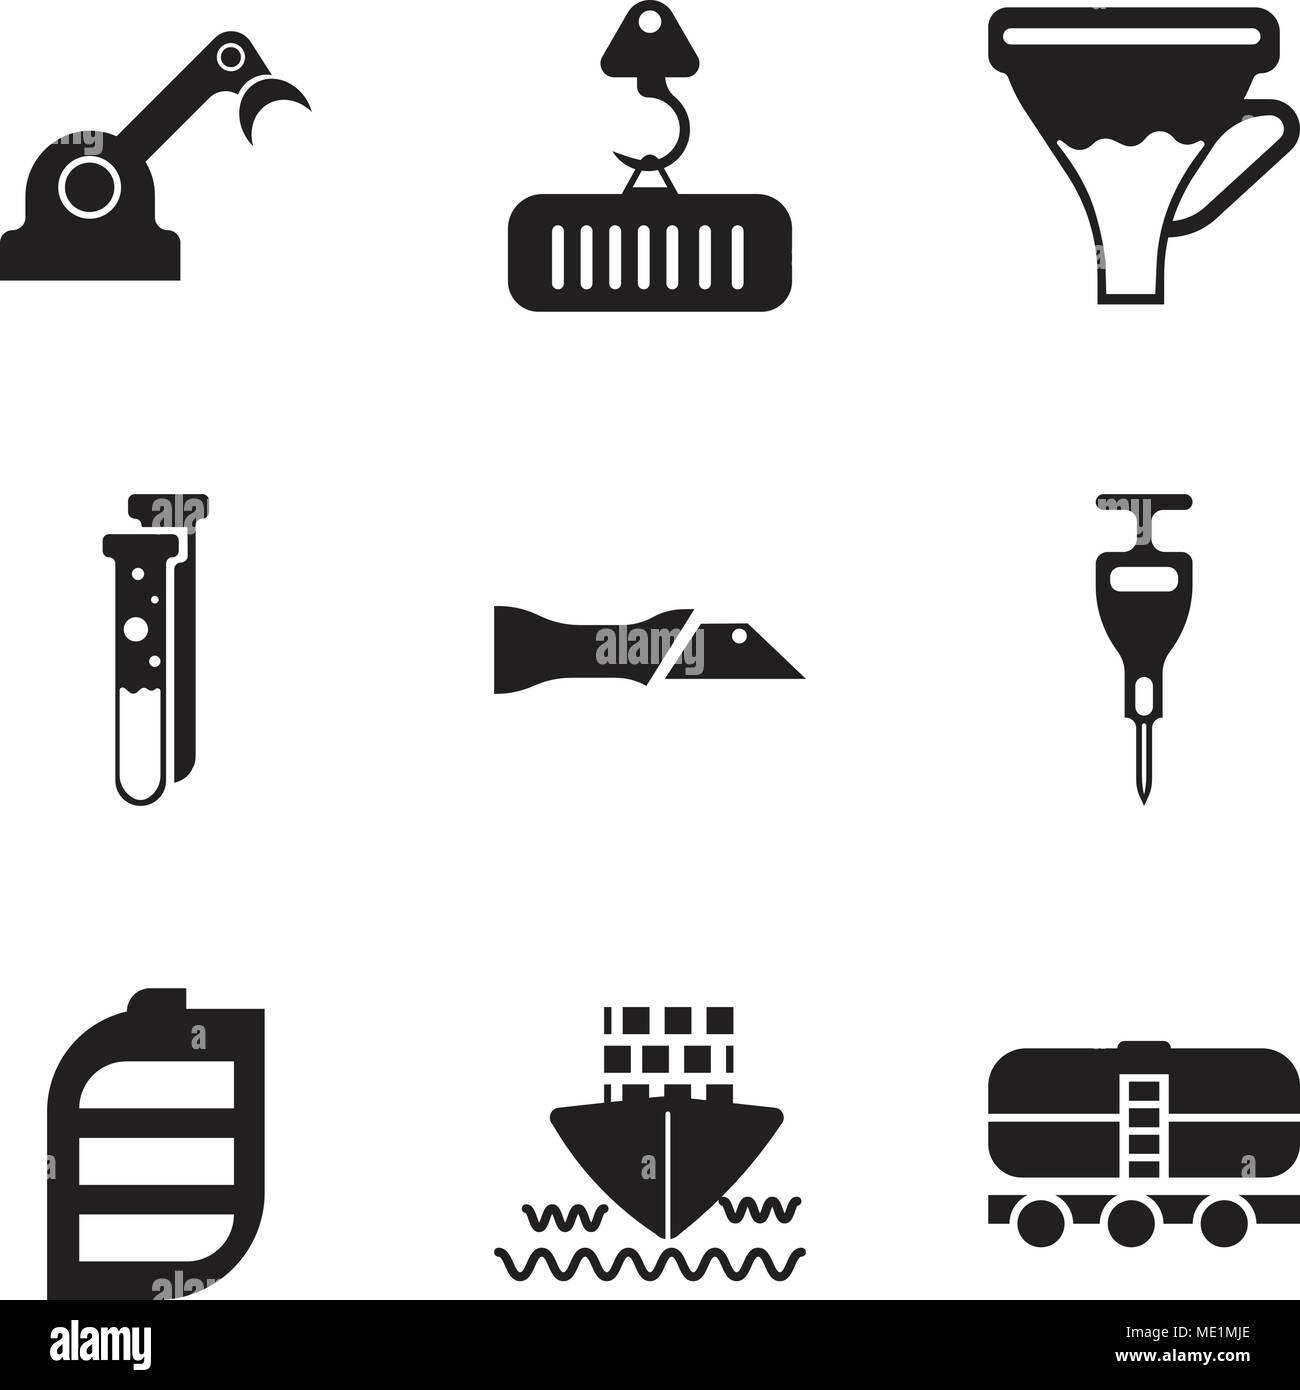 Set Of 9 simple editable icons such as train, ship, battery, puncher, knife, capsule, funnel, crane with load, jenny, can be used for mobile, web UI Stock Vector